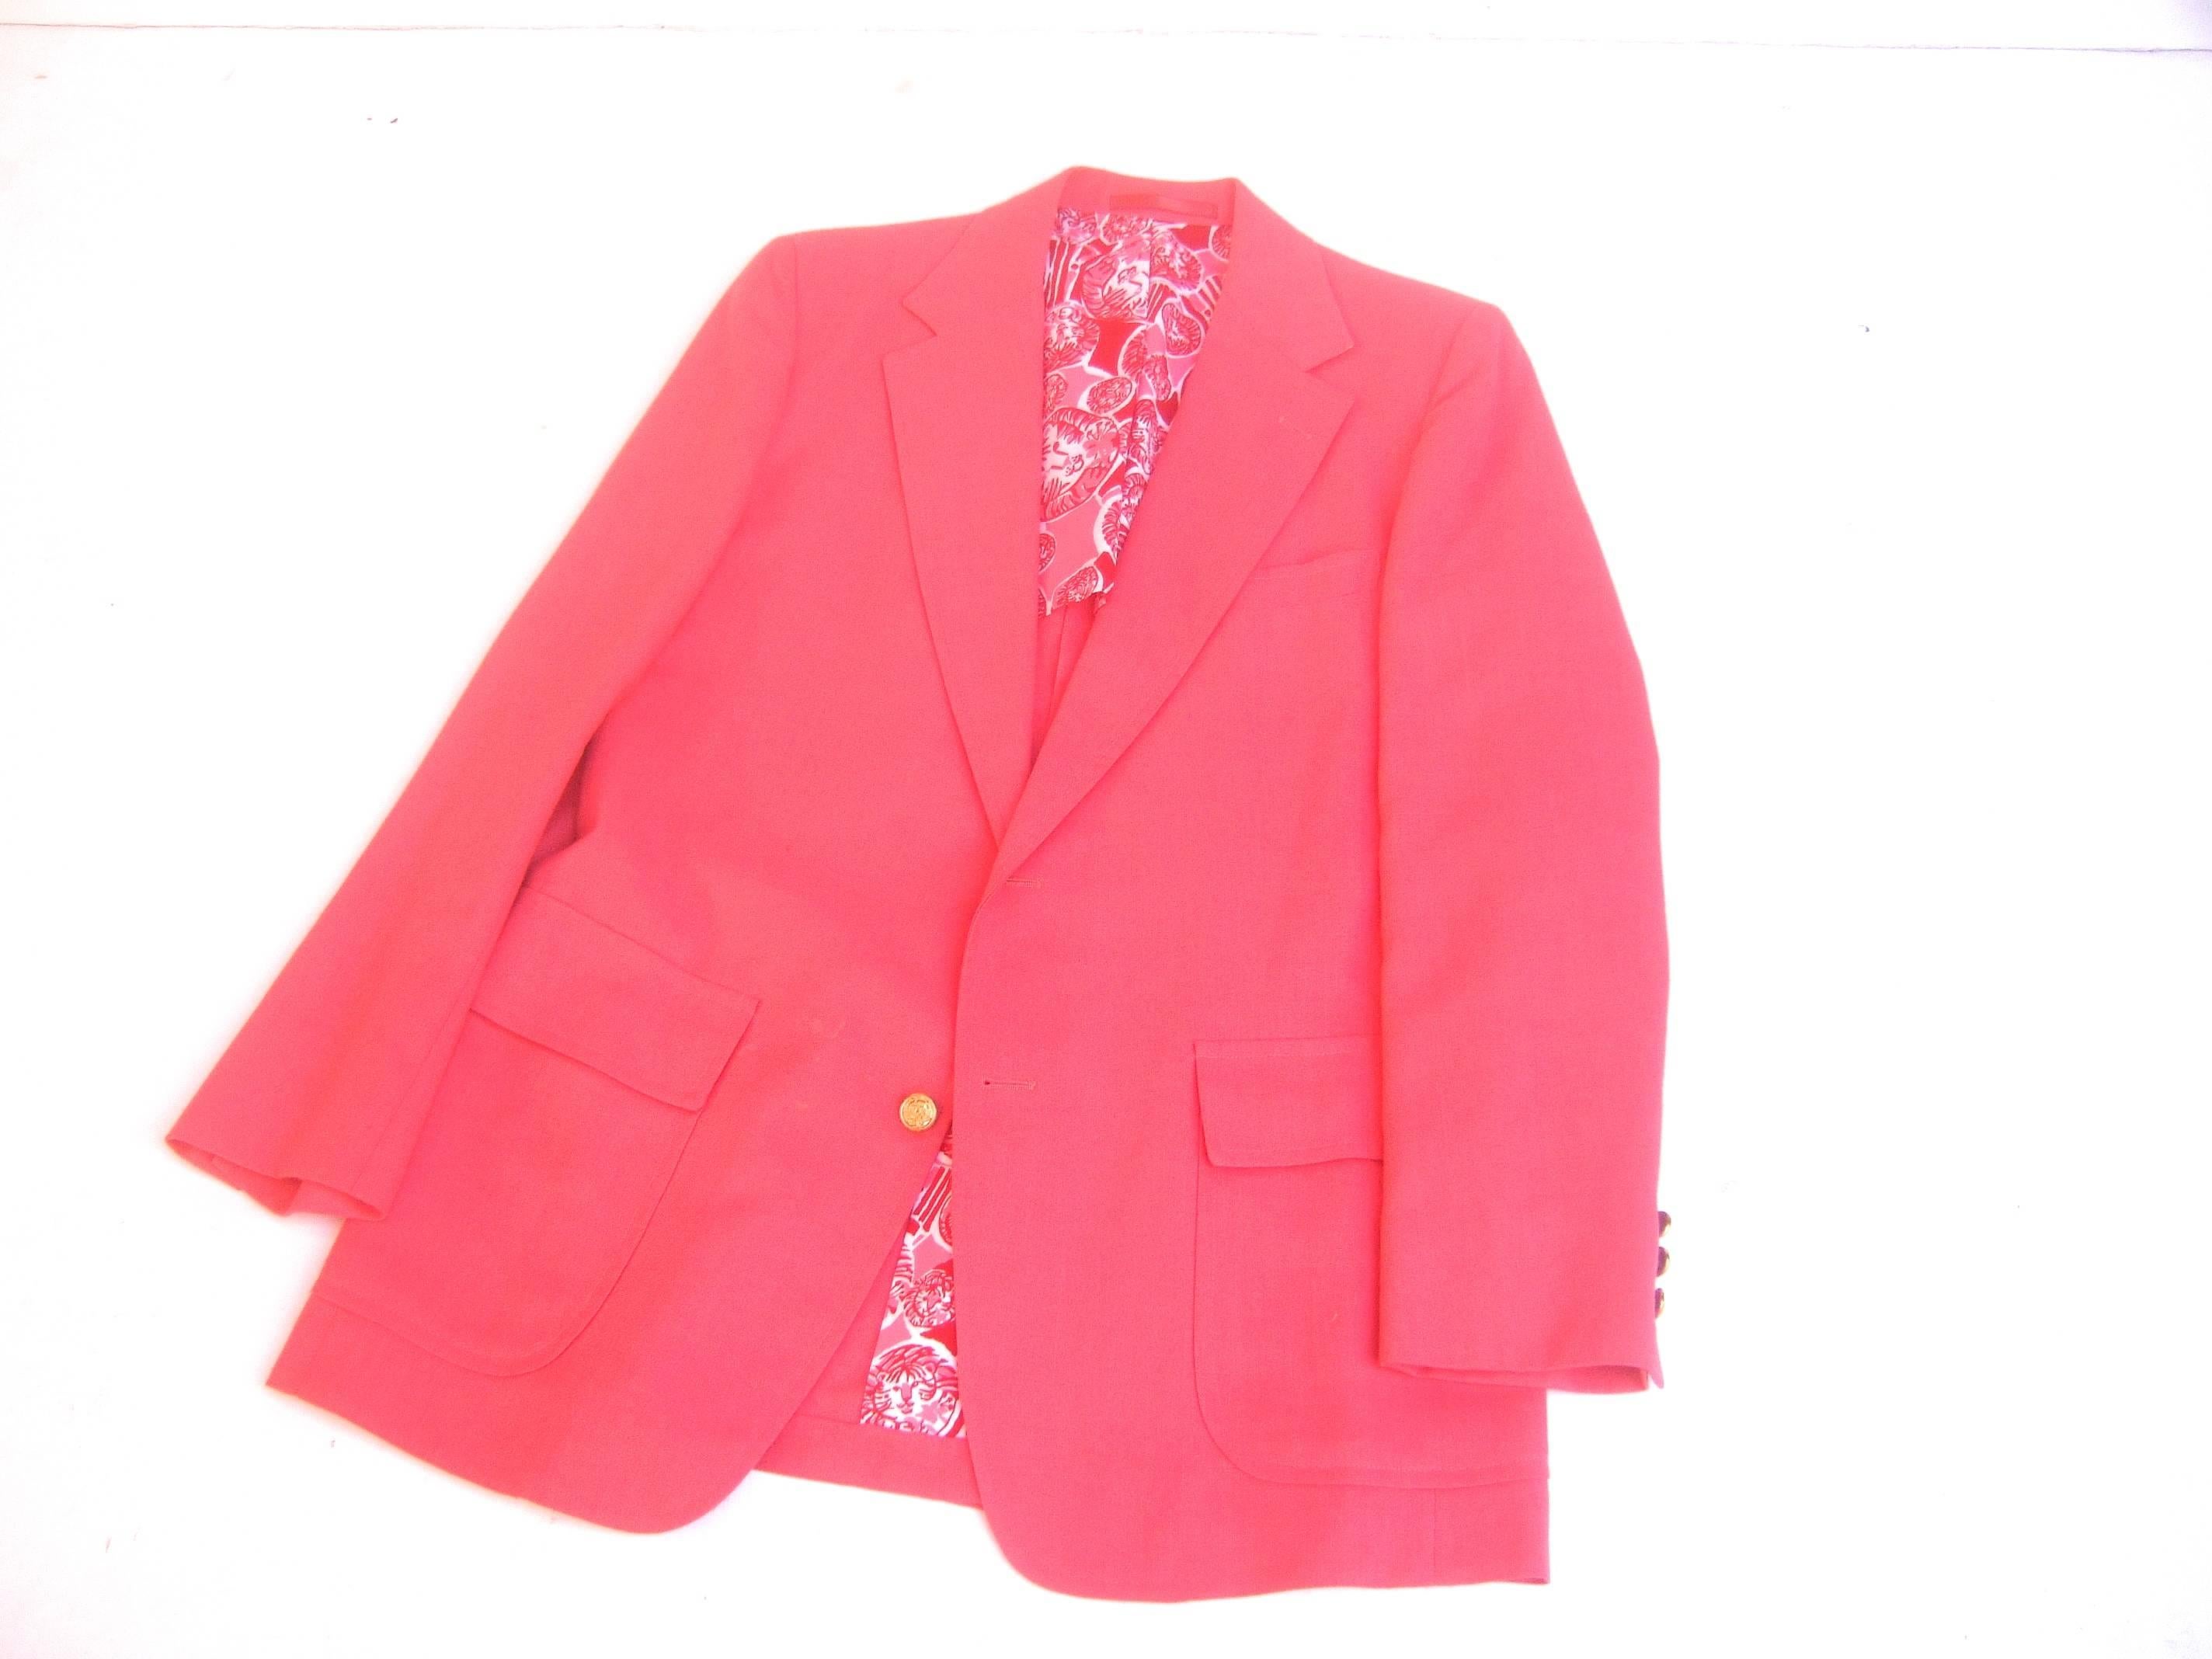 Men's Lilly Pulitzer coral pink resort sports jacket c 1970s
The resort style jacket is partially lined in her 
whimsical tiger print fabric in red and pink

The stylish preppy resort jacket is adorned 
with gilt metal buttons with a tiger head